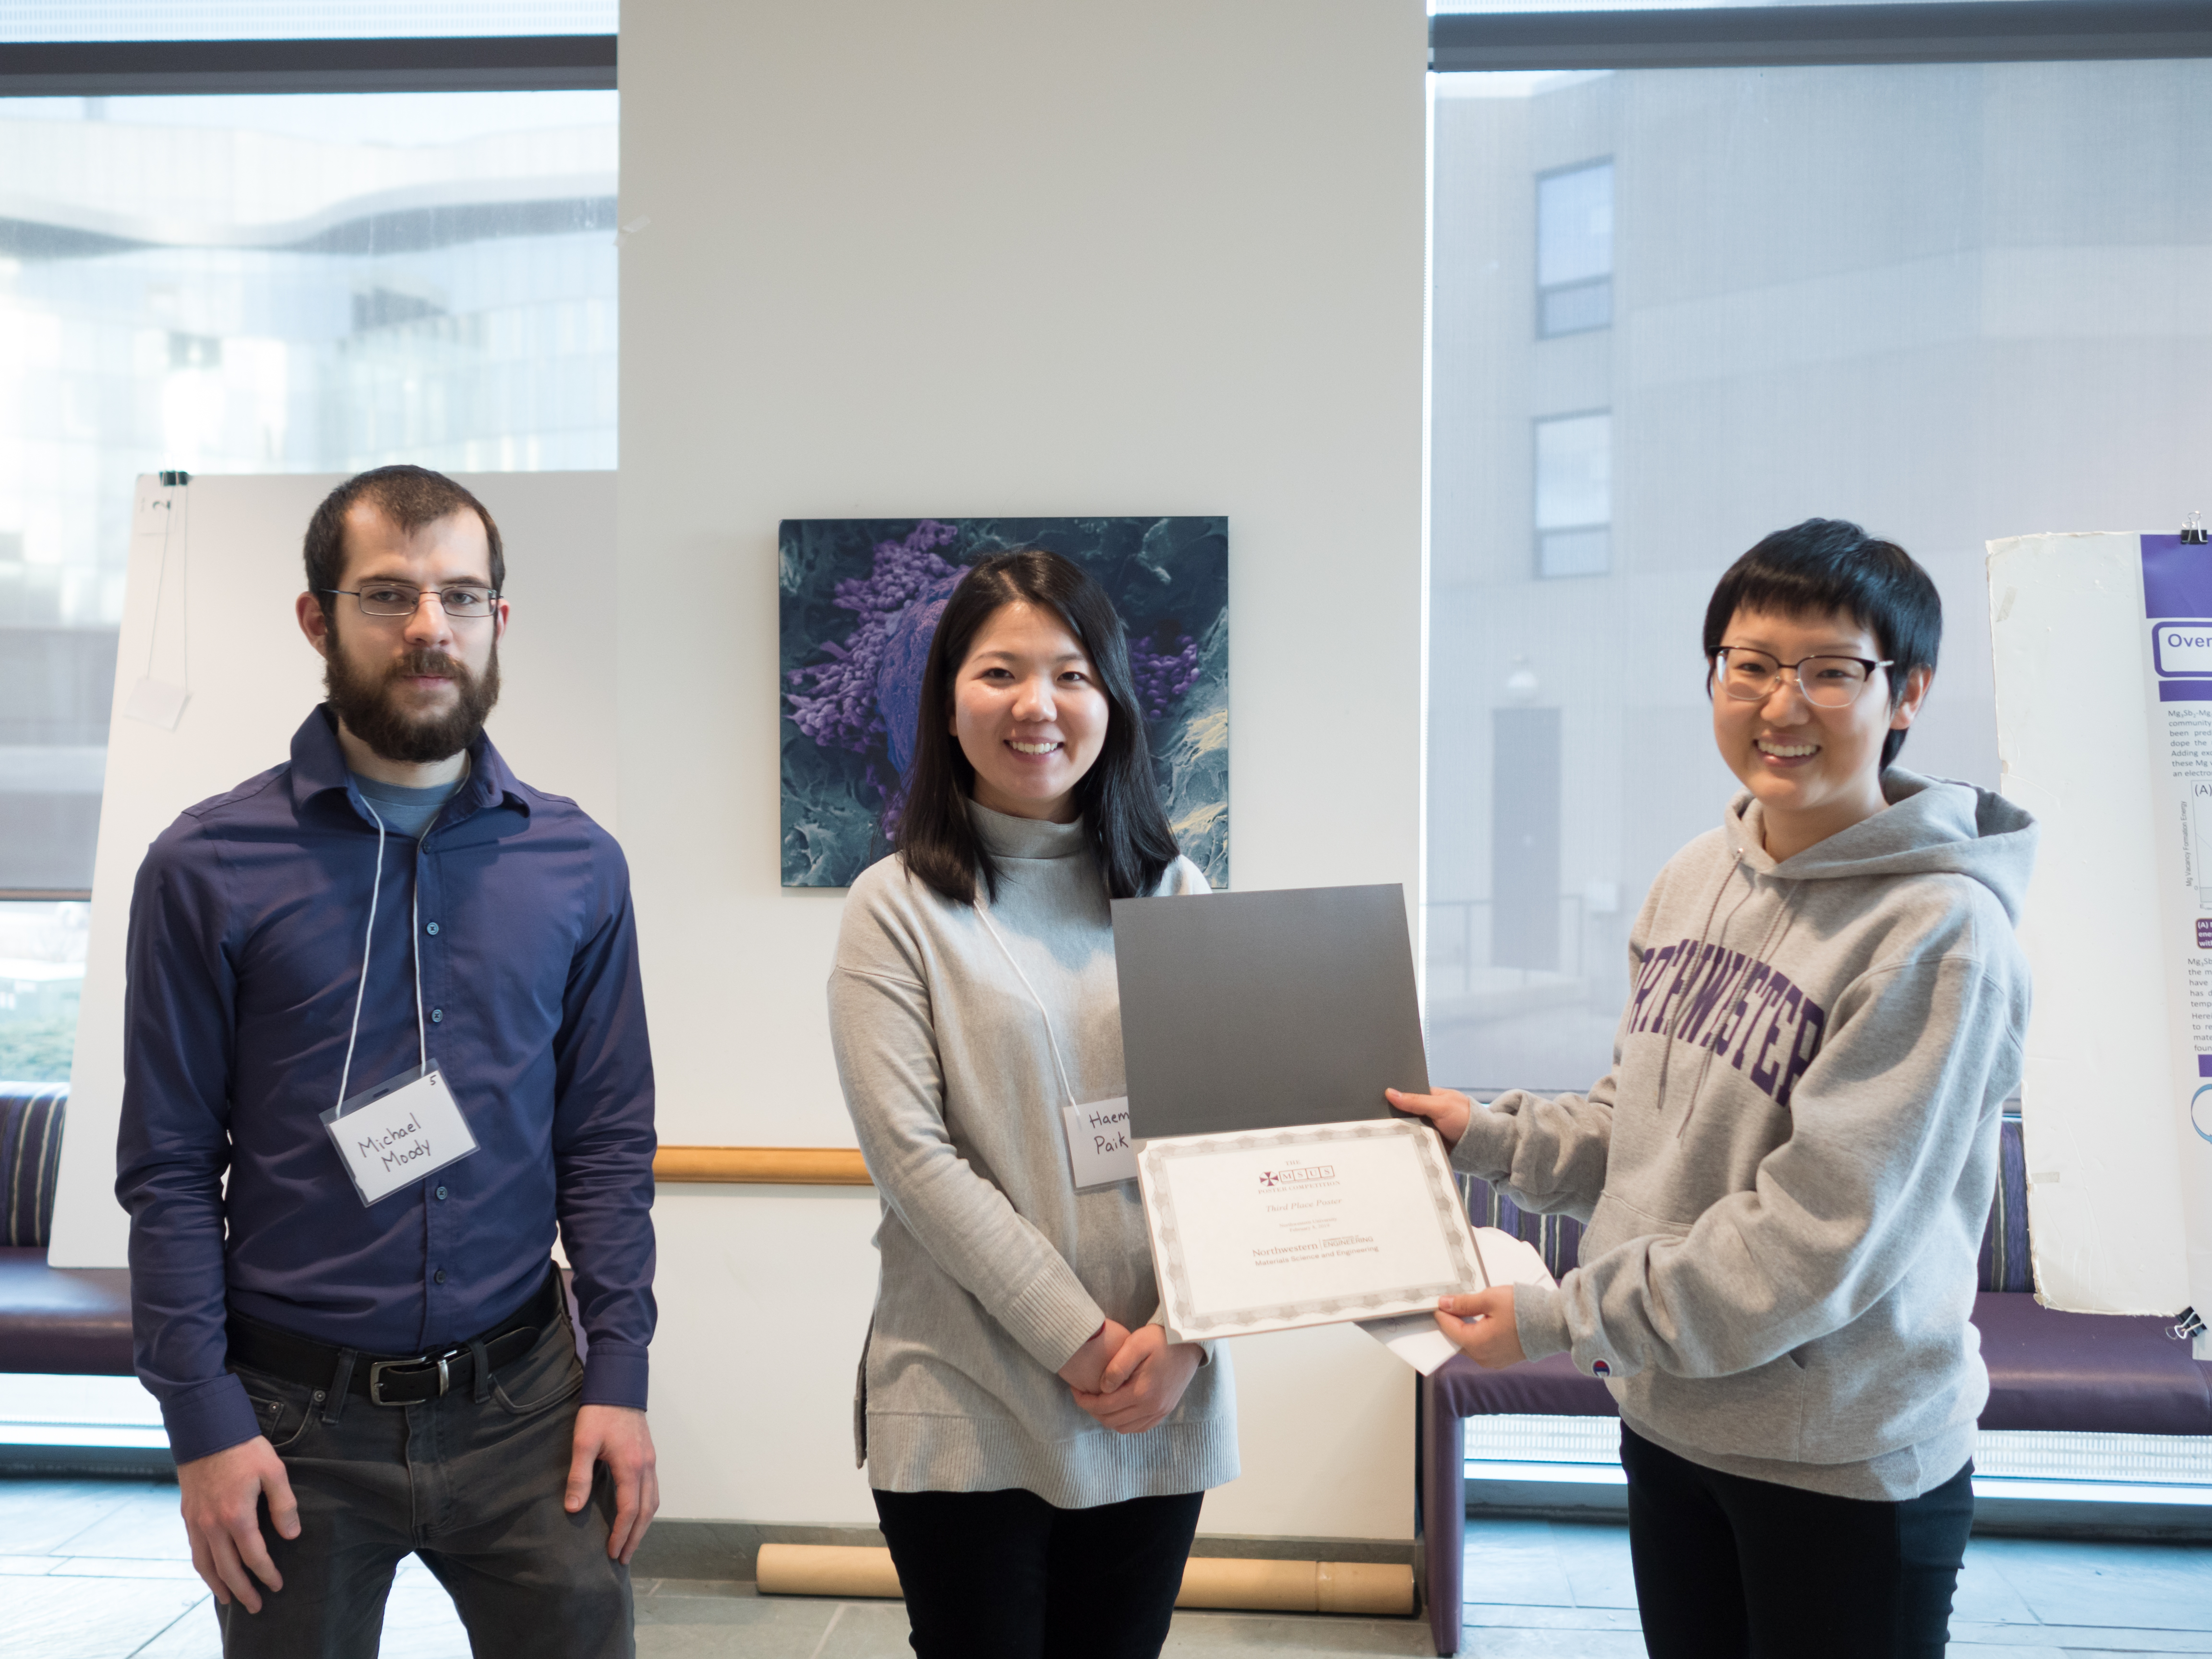 The third place award presented to Michael Moody and Haemin Paik by Ju Ying Shang.